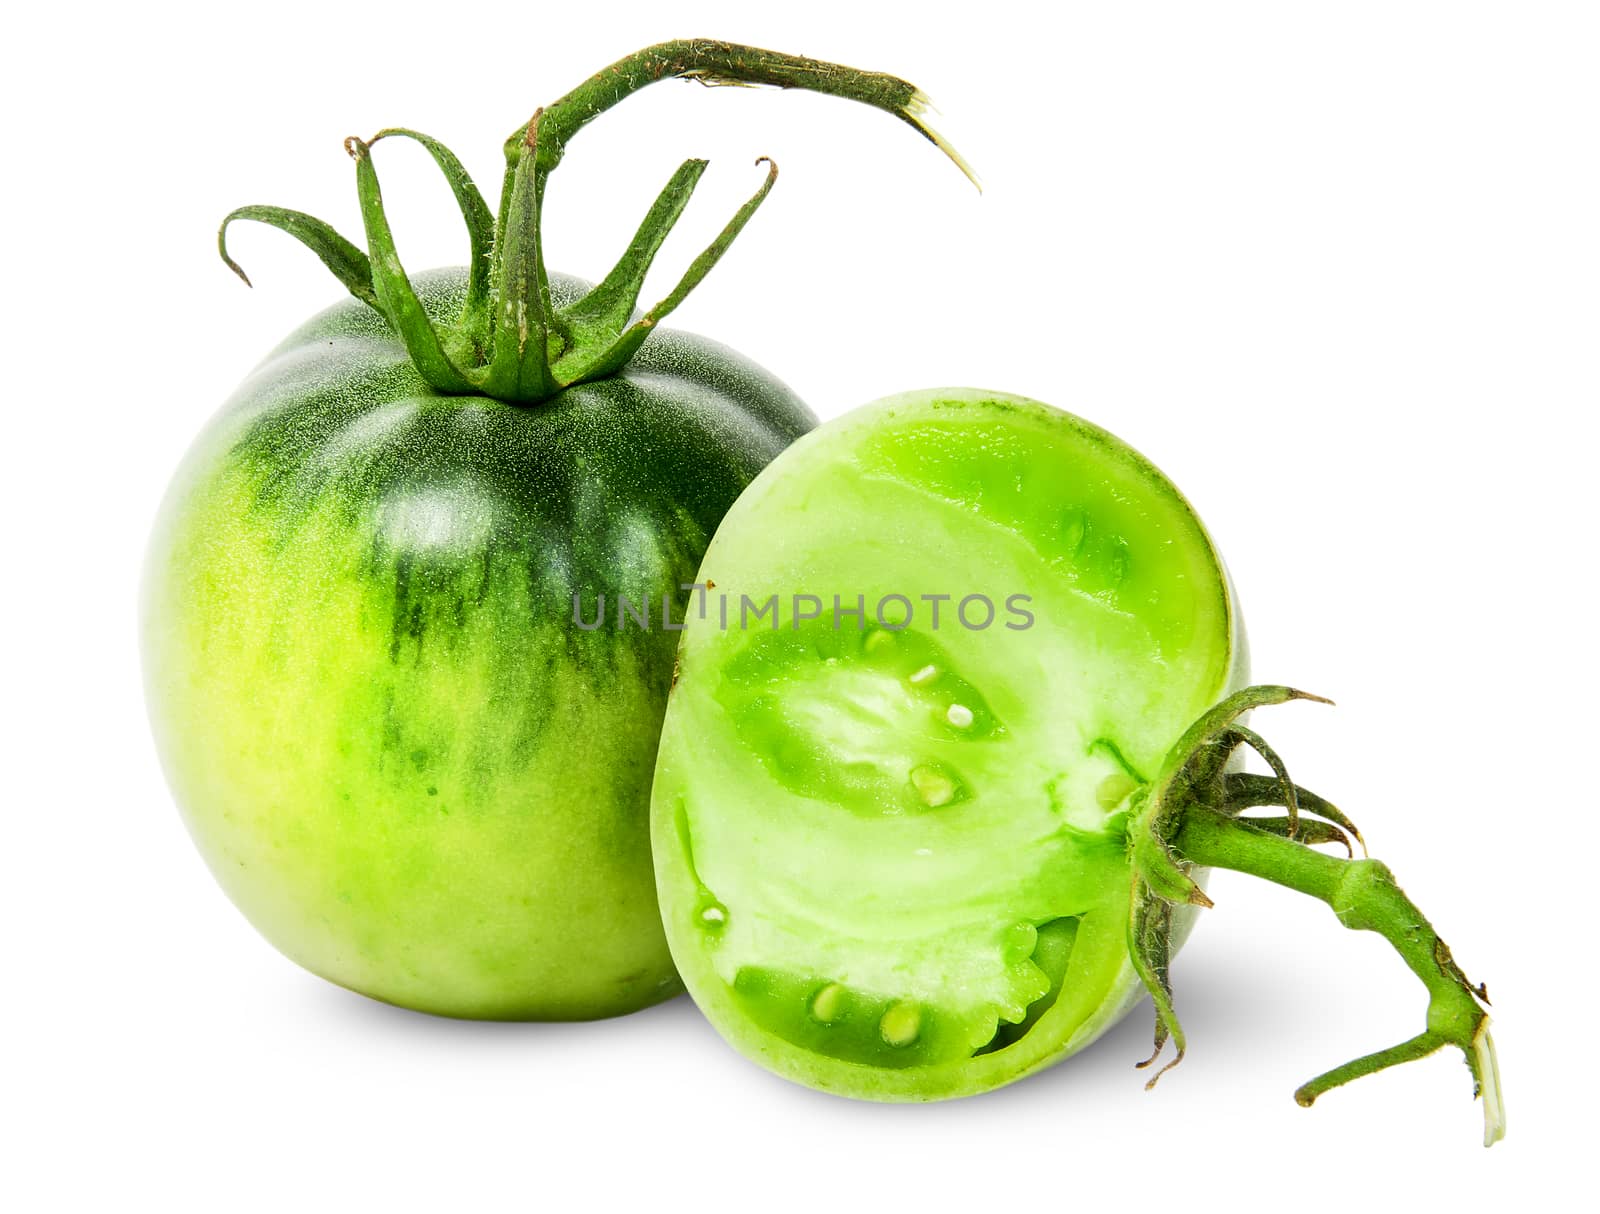 Whole and half green tomatoes by Cipariss